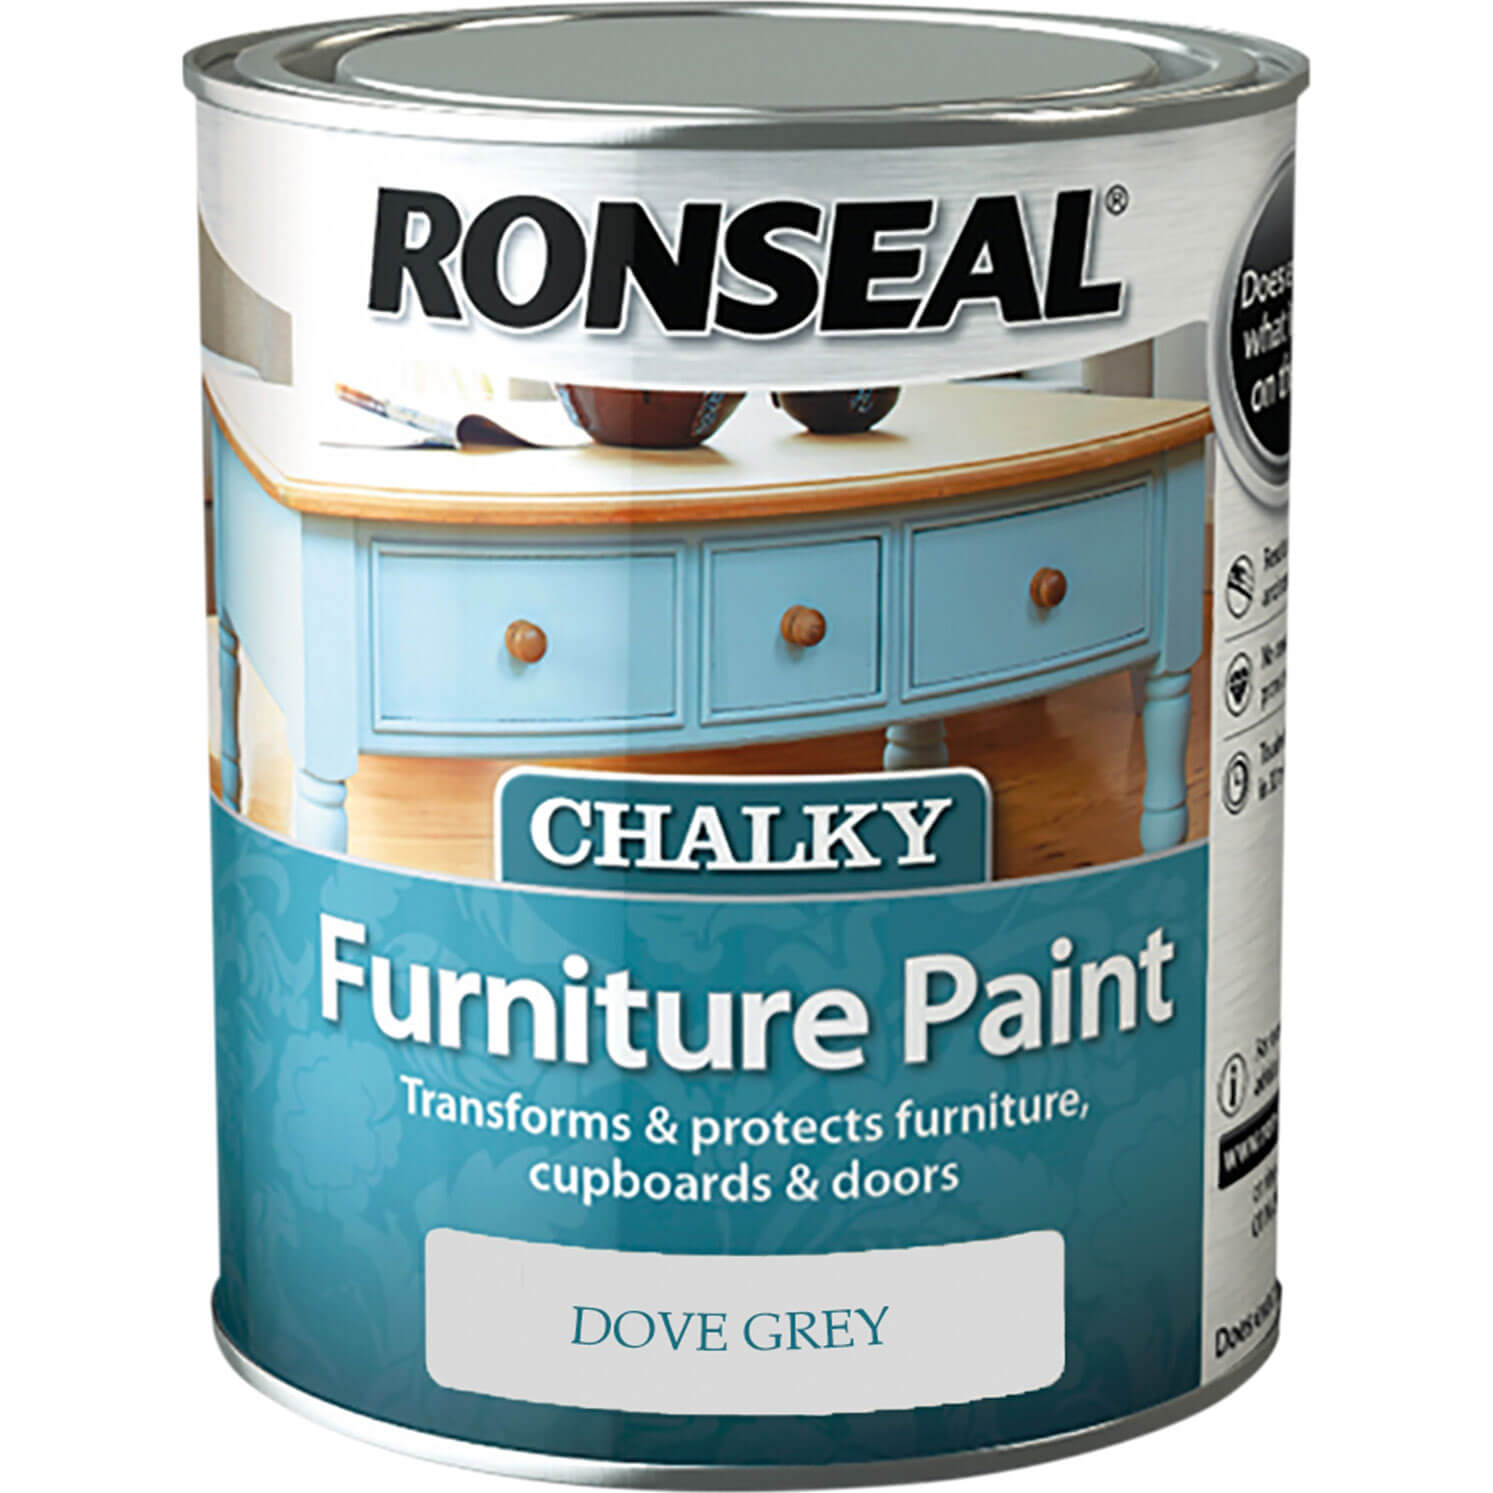 Image of Ronseal Chalky Furniture Paint Dove Grey 750ml